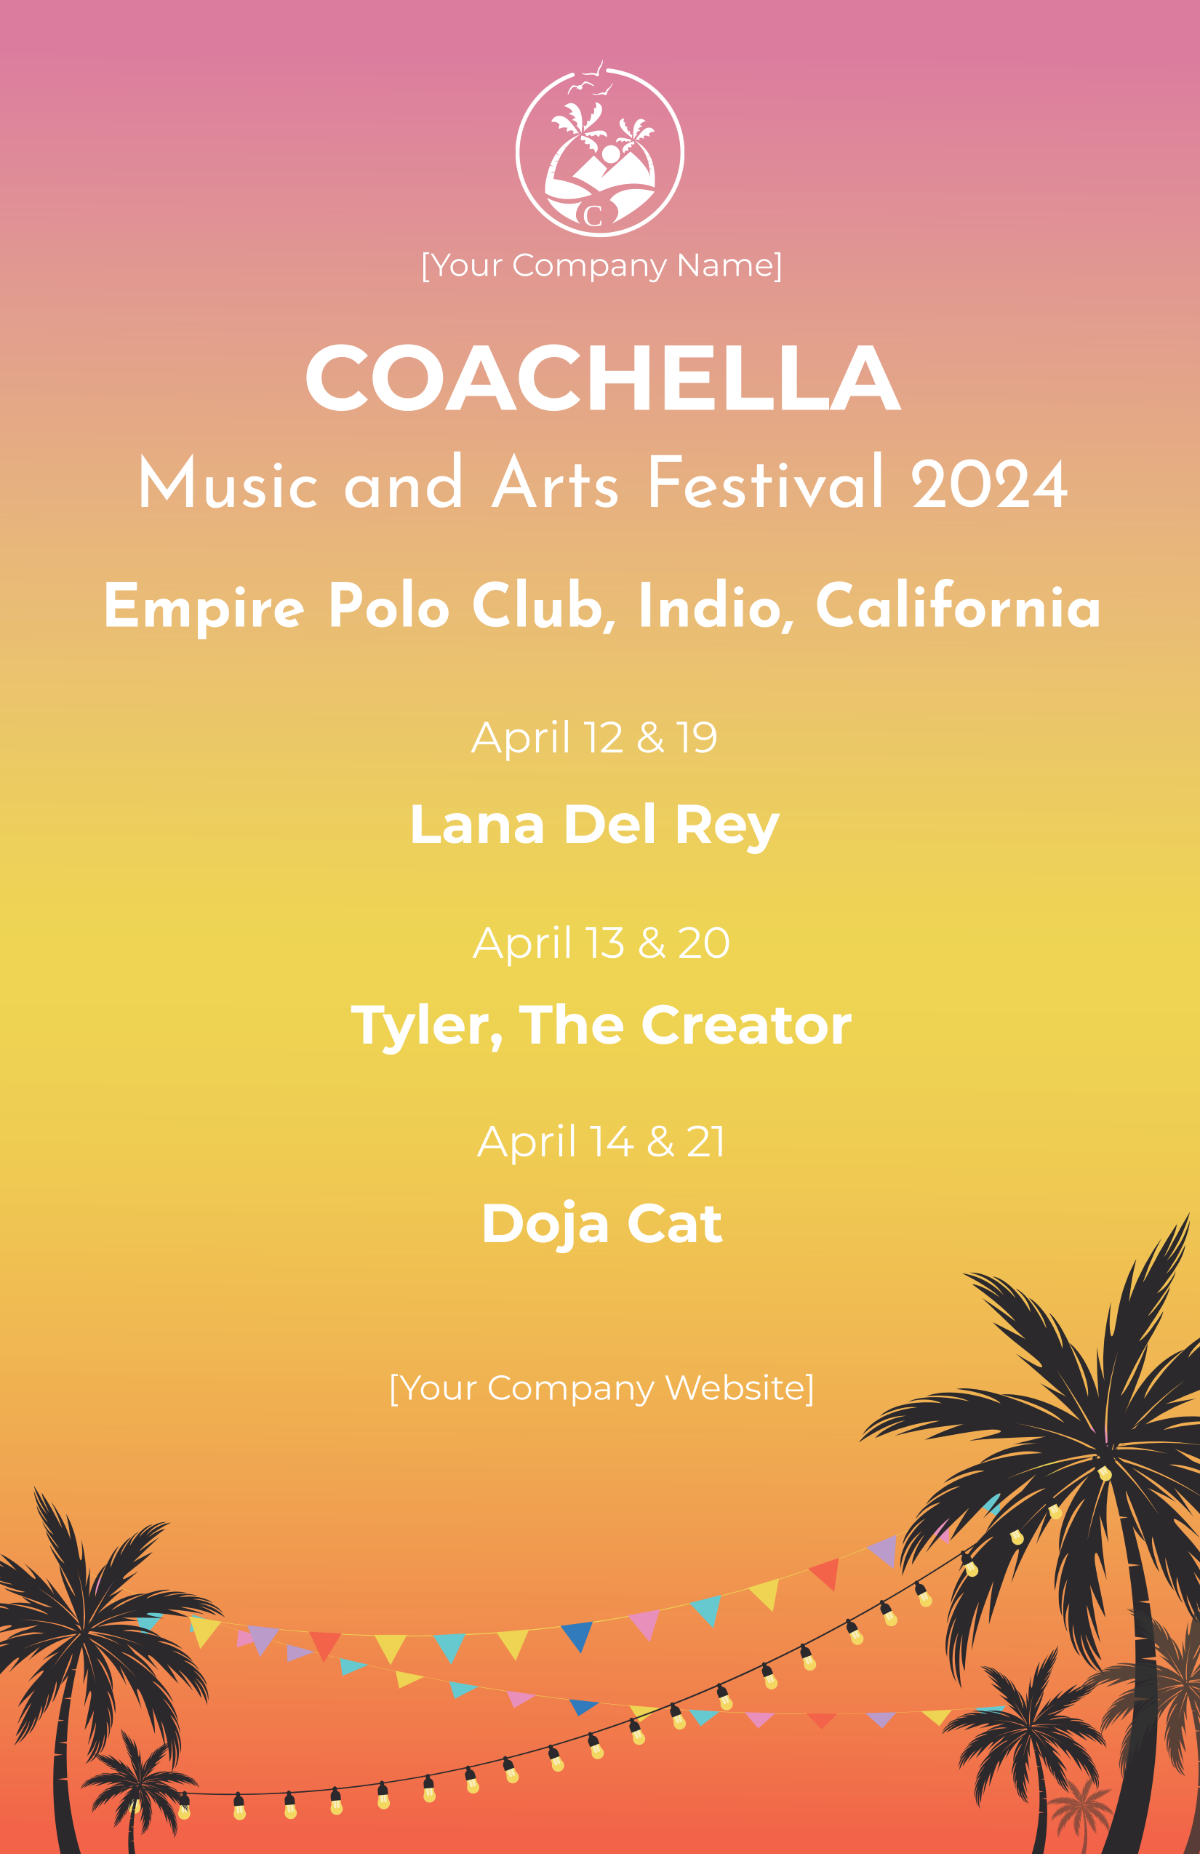 Coachella Poster by Year Template